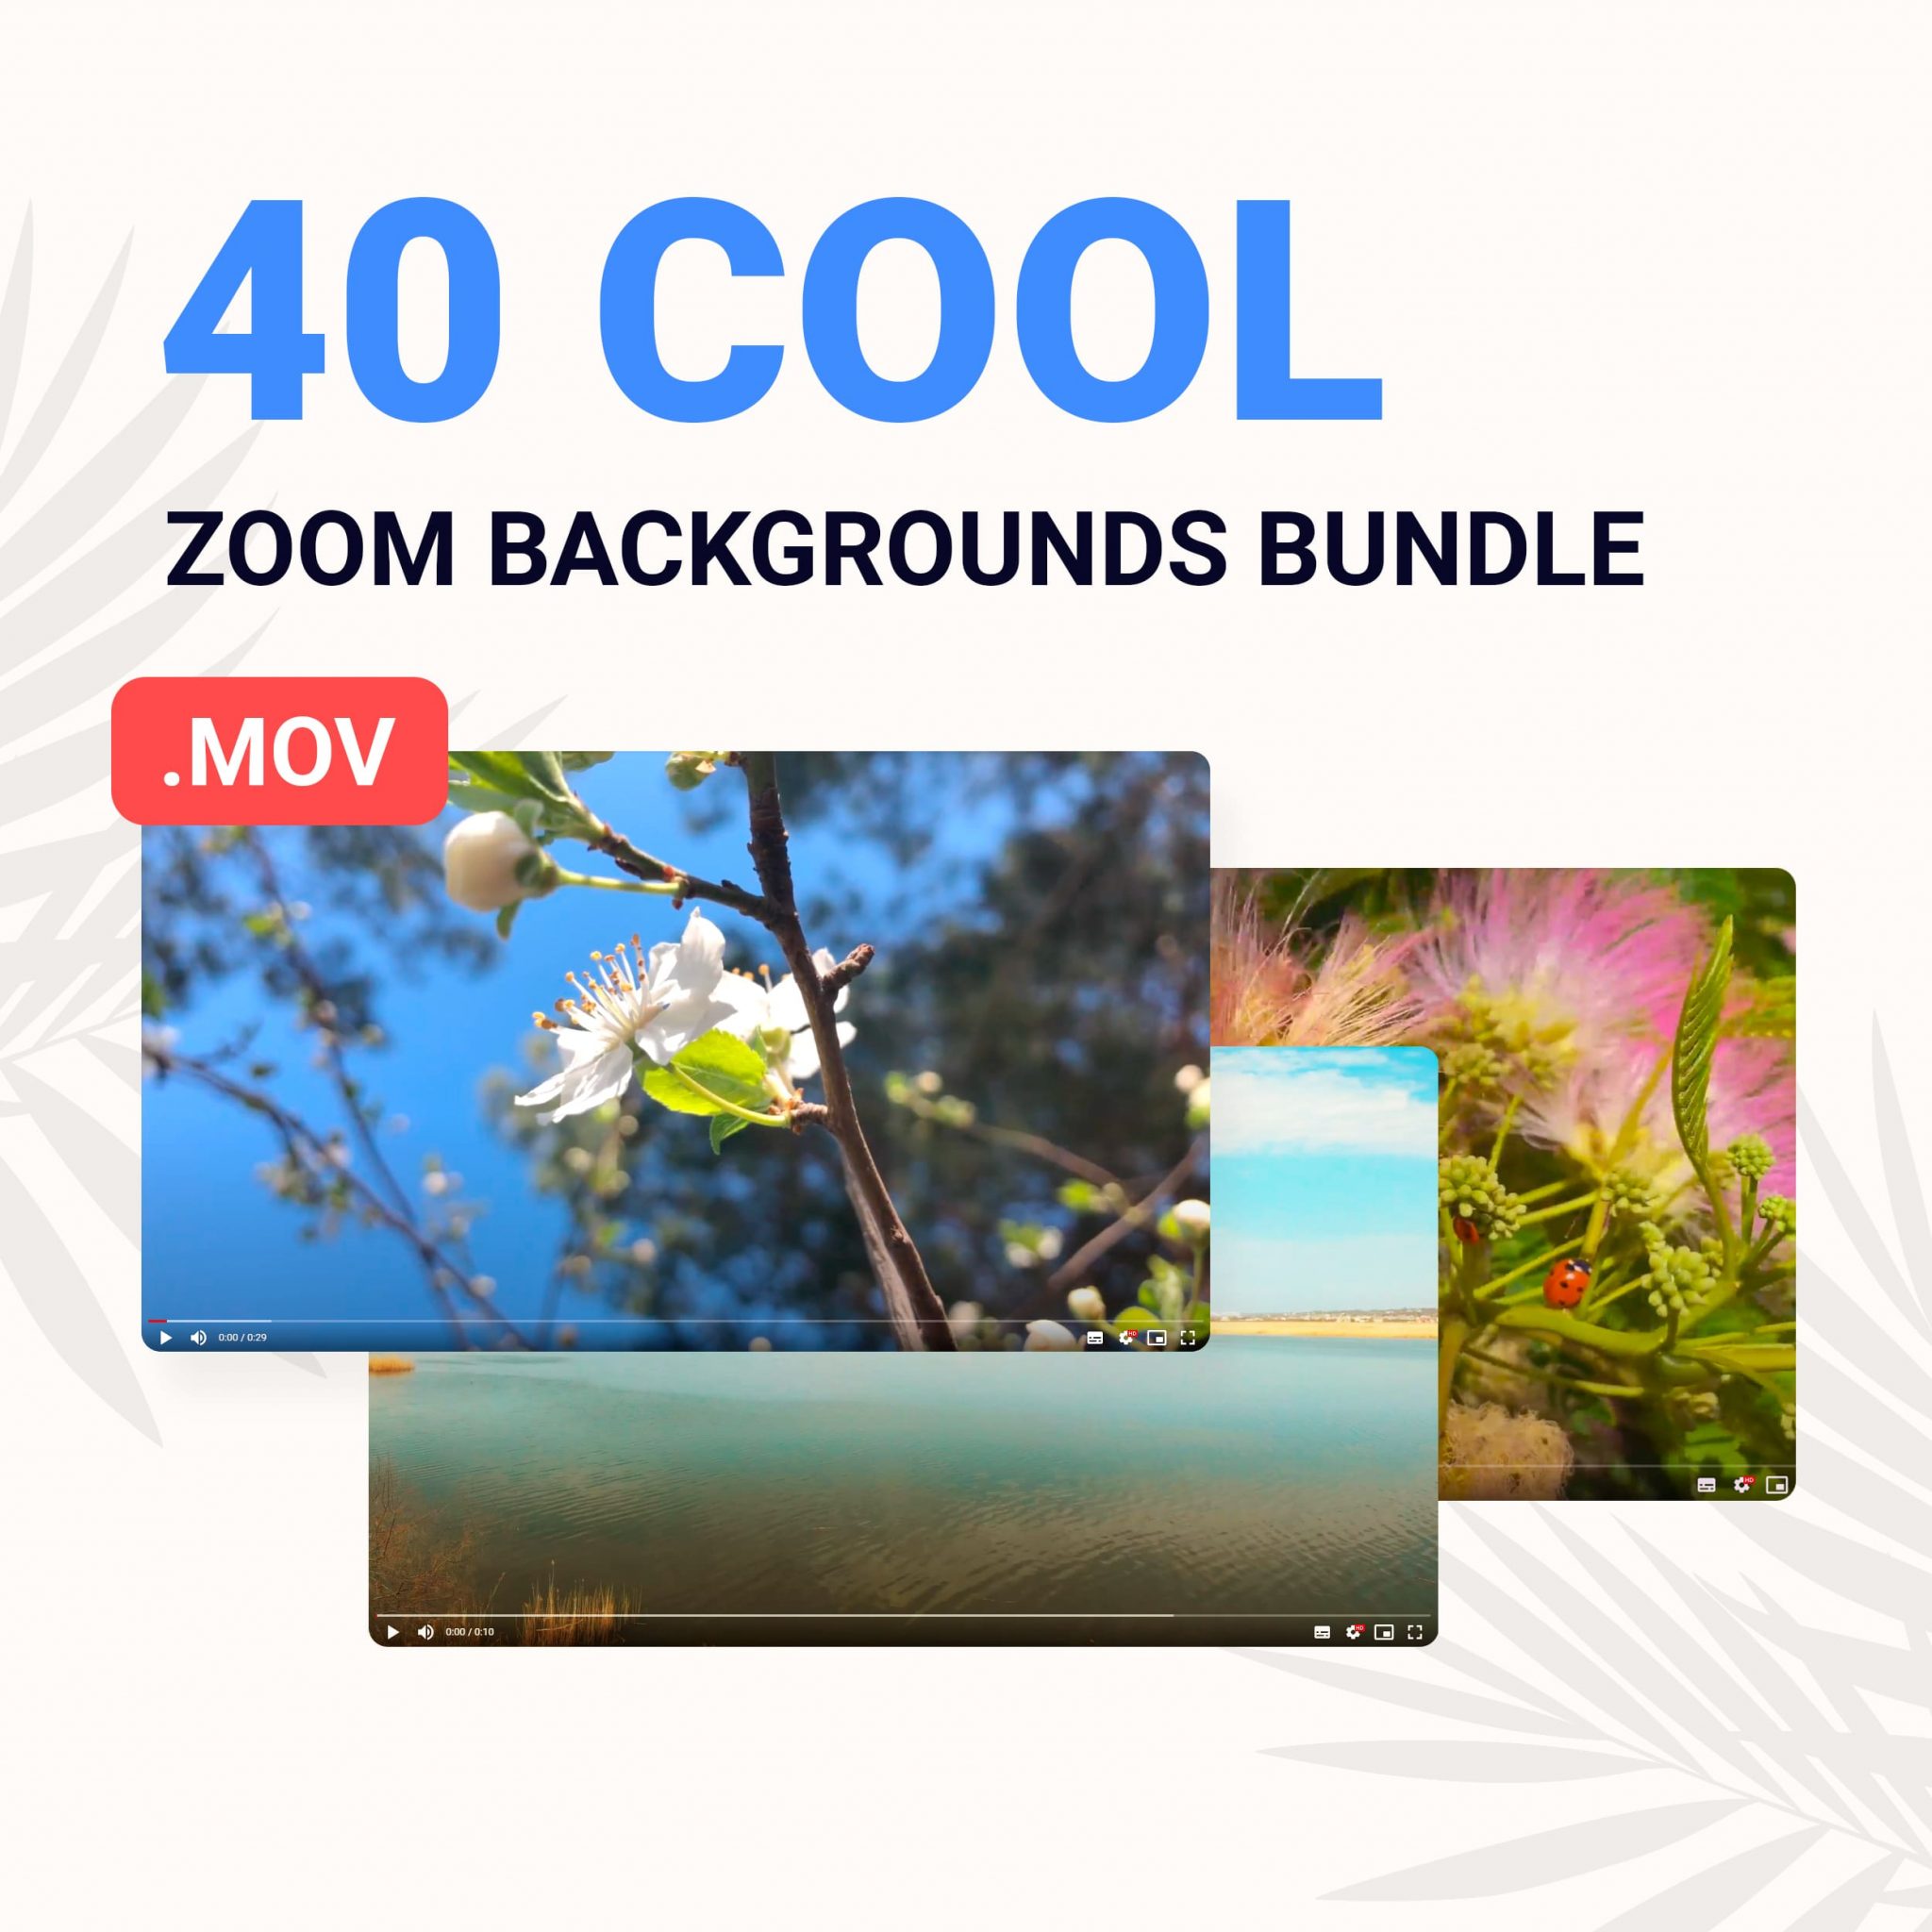 🏞 45+ Best Zoom Virtual Background In 2021: Images And Video. Make Your Video Conferences Fun